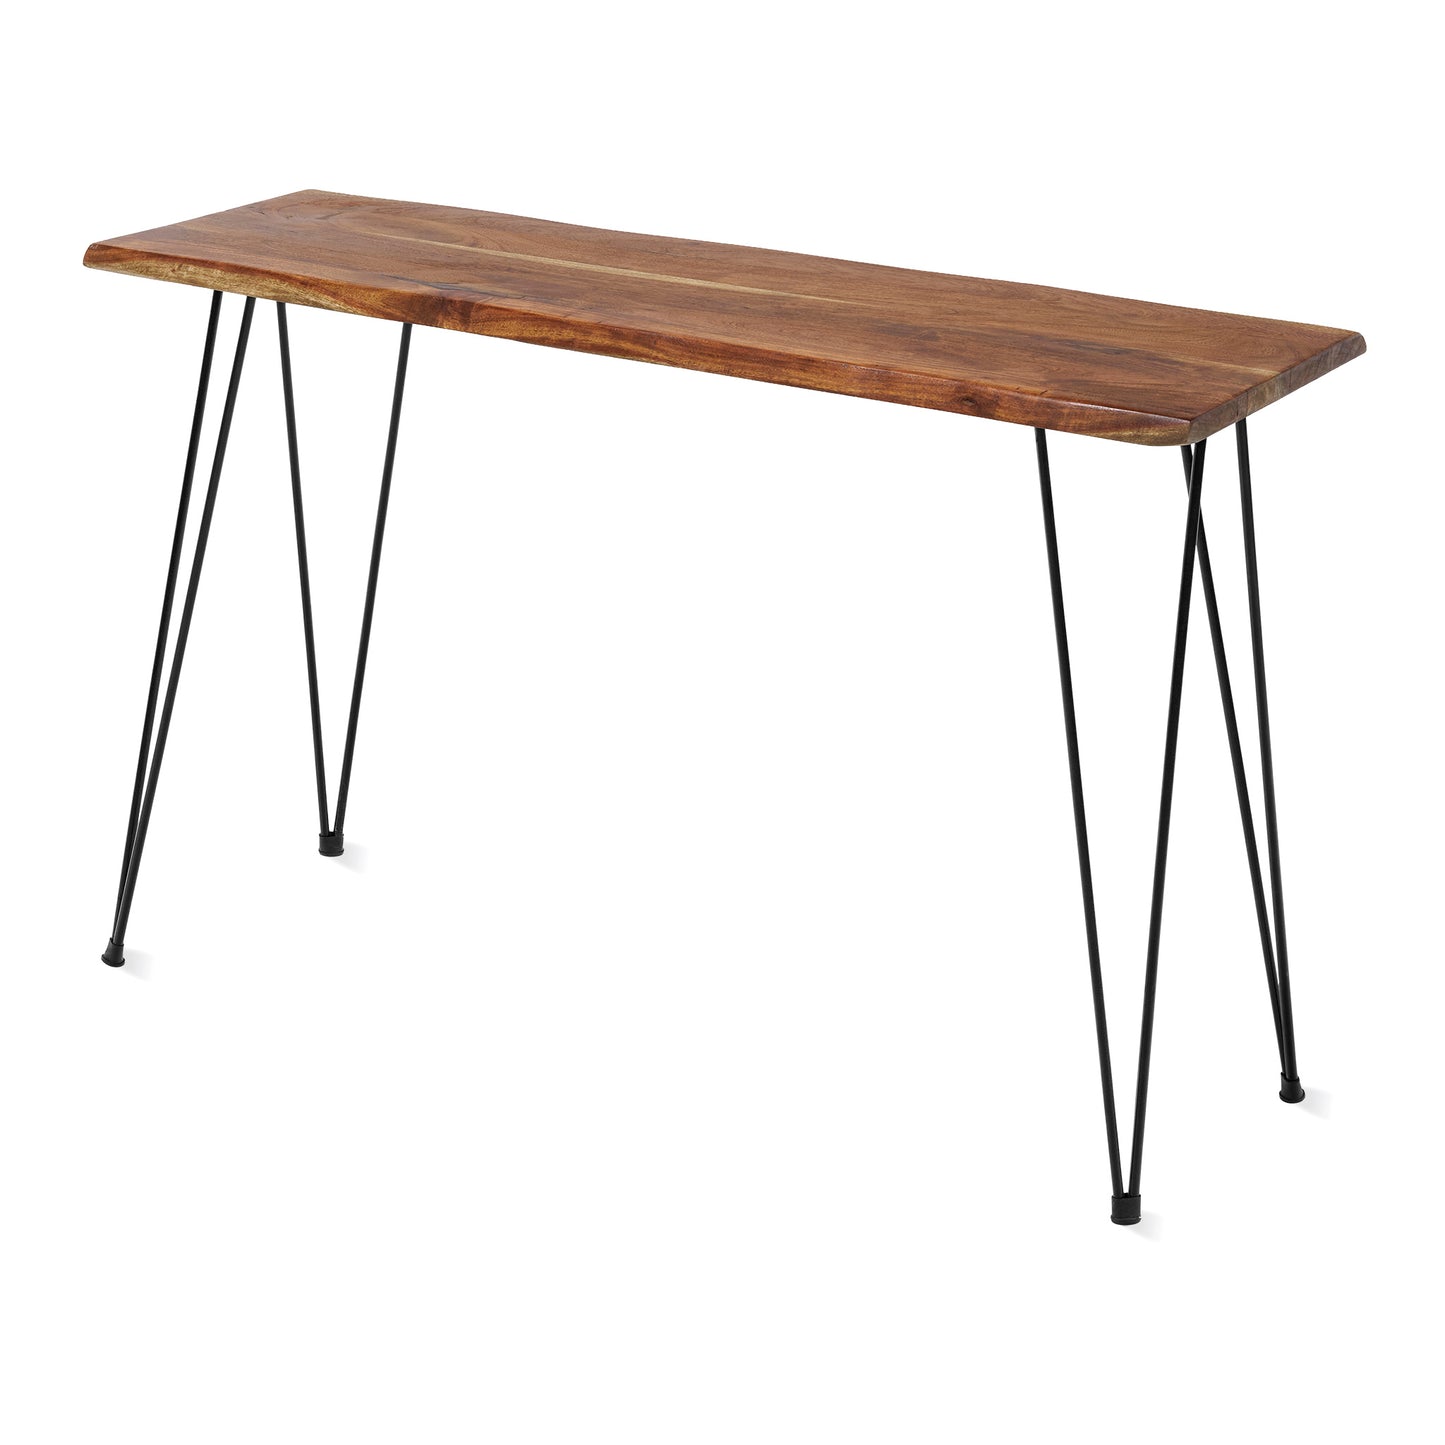 LIVE EDGE HAIRPIN CONSOLE